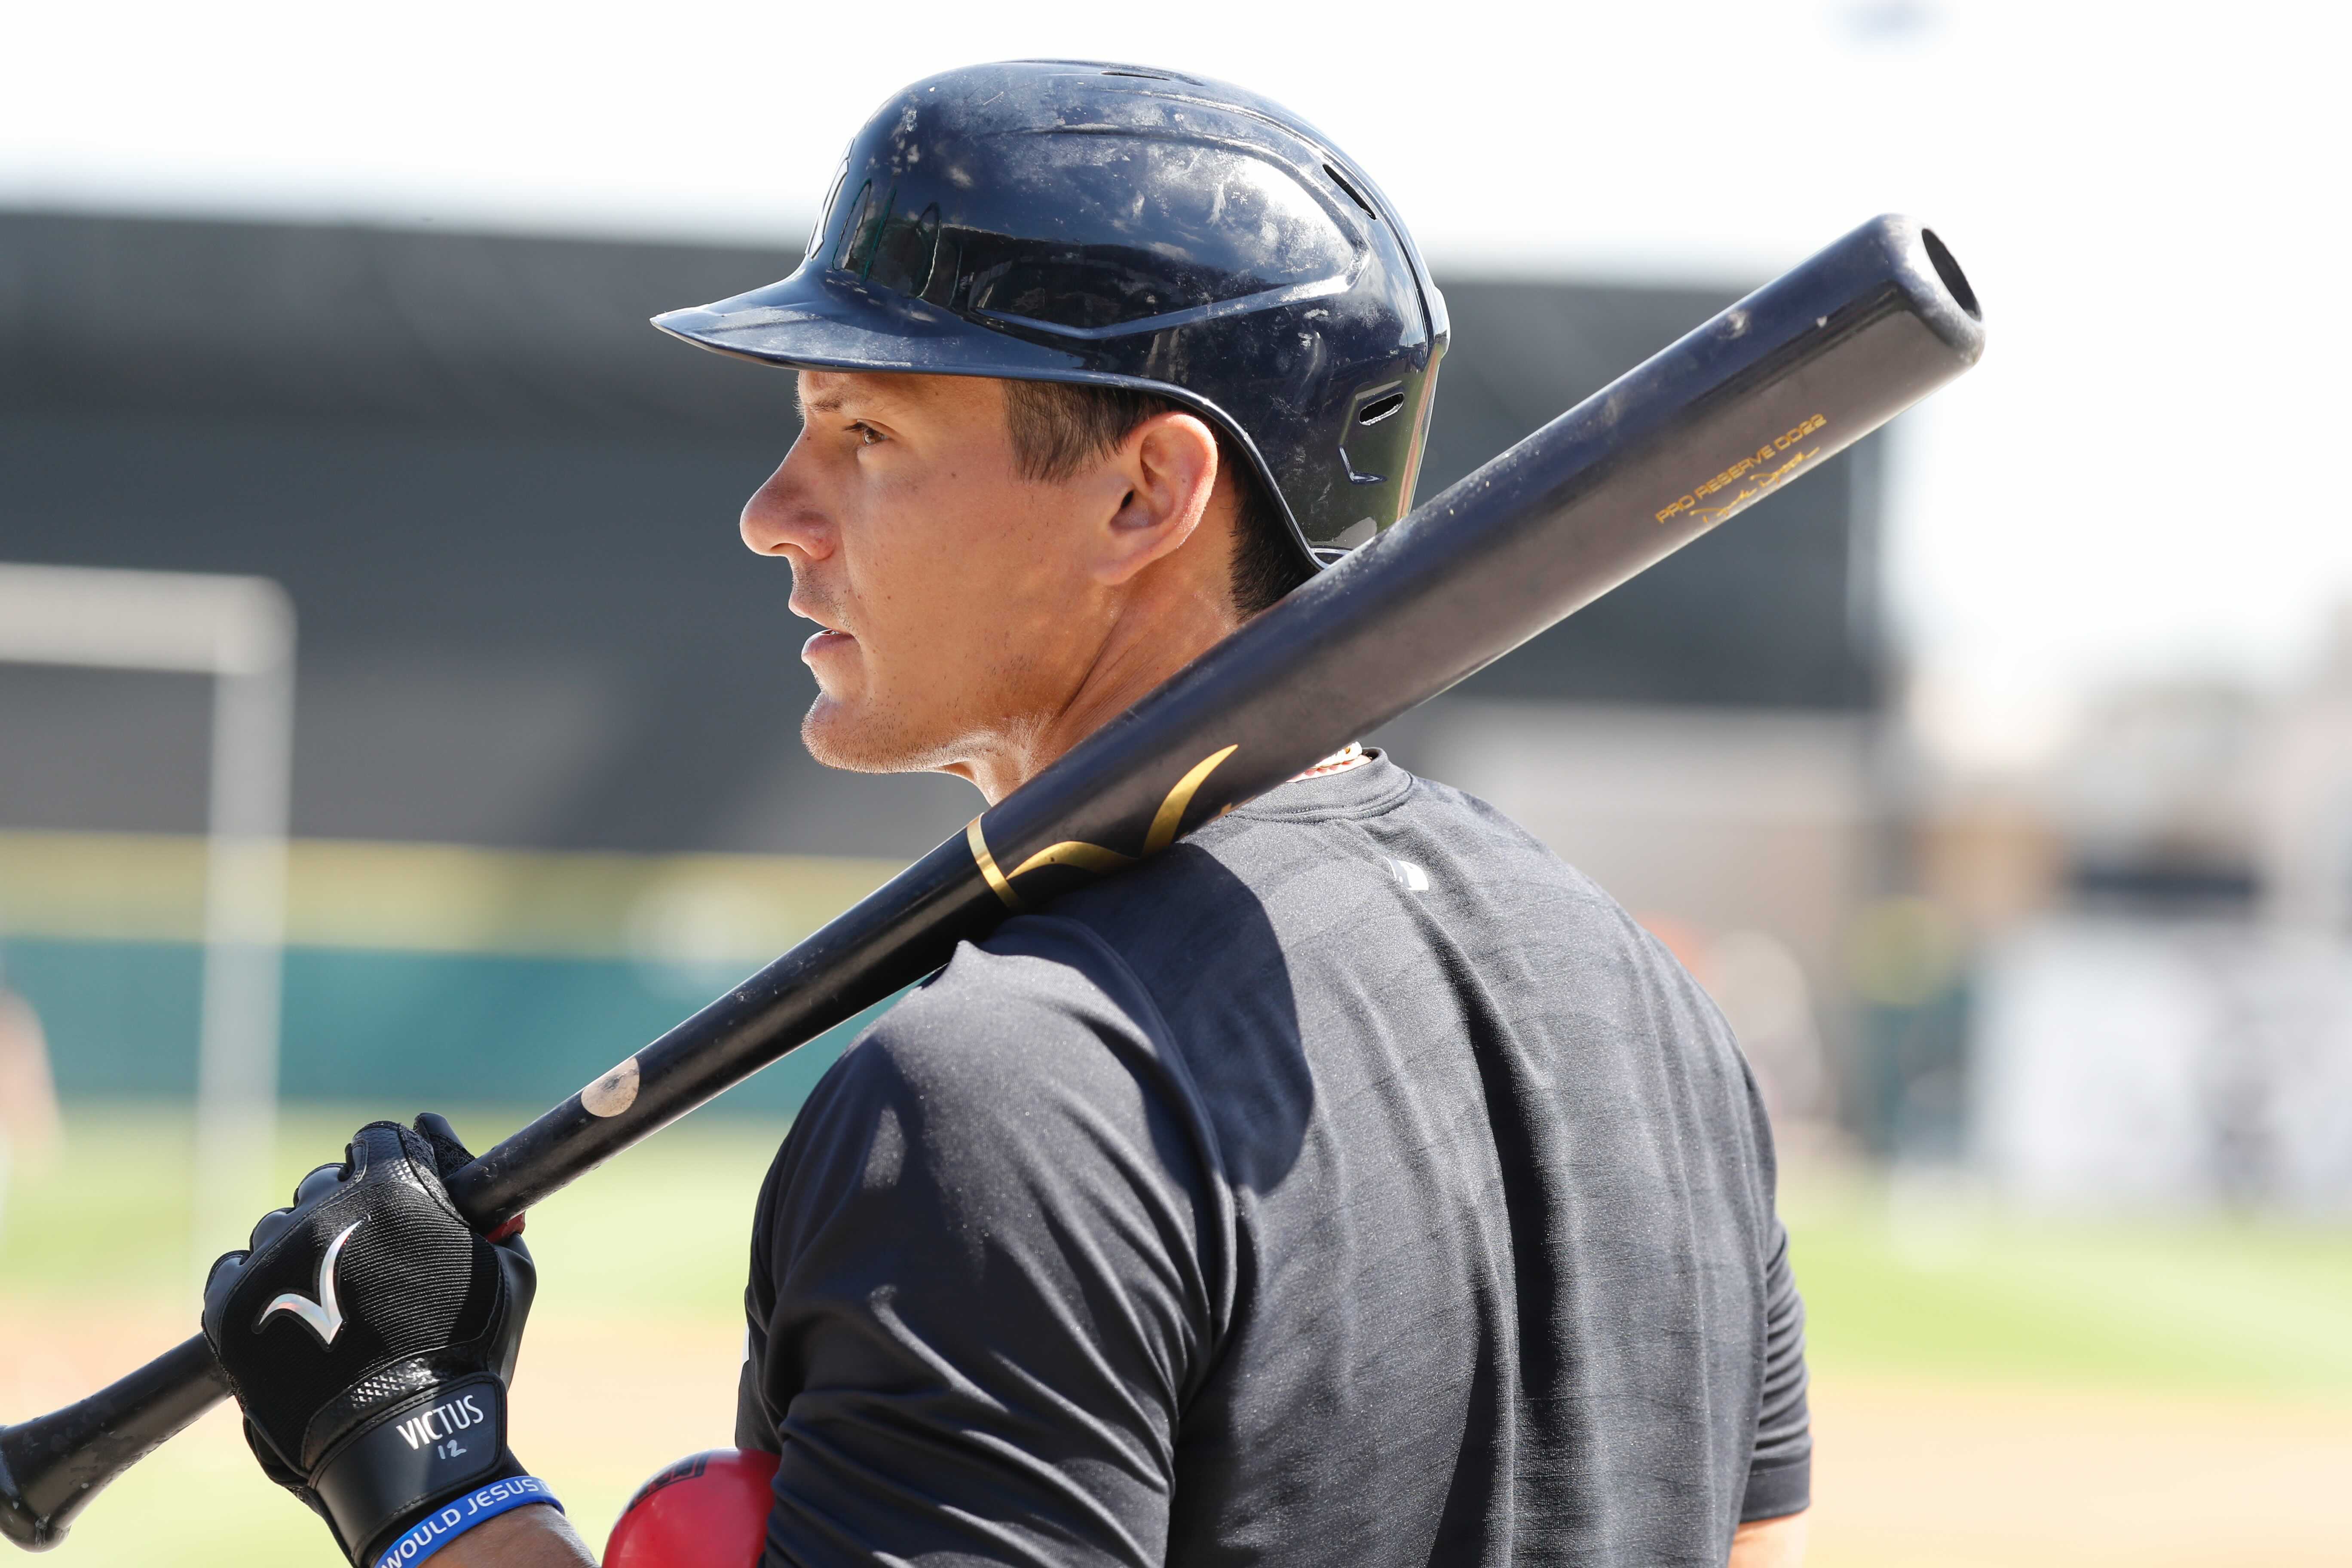 Why haven't you heard of Derek Dietrich before now?